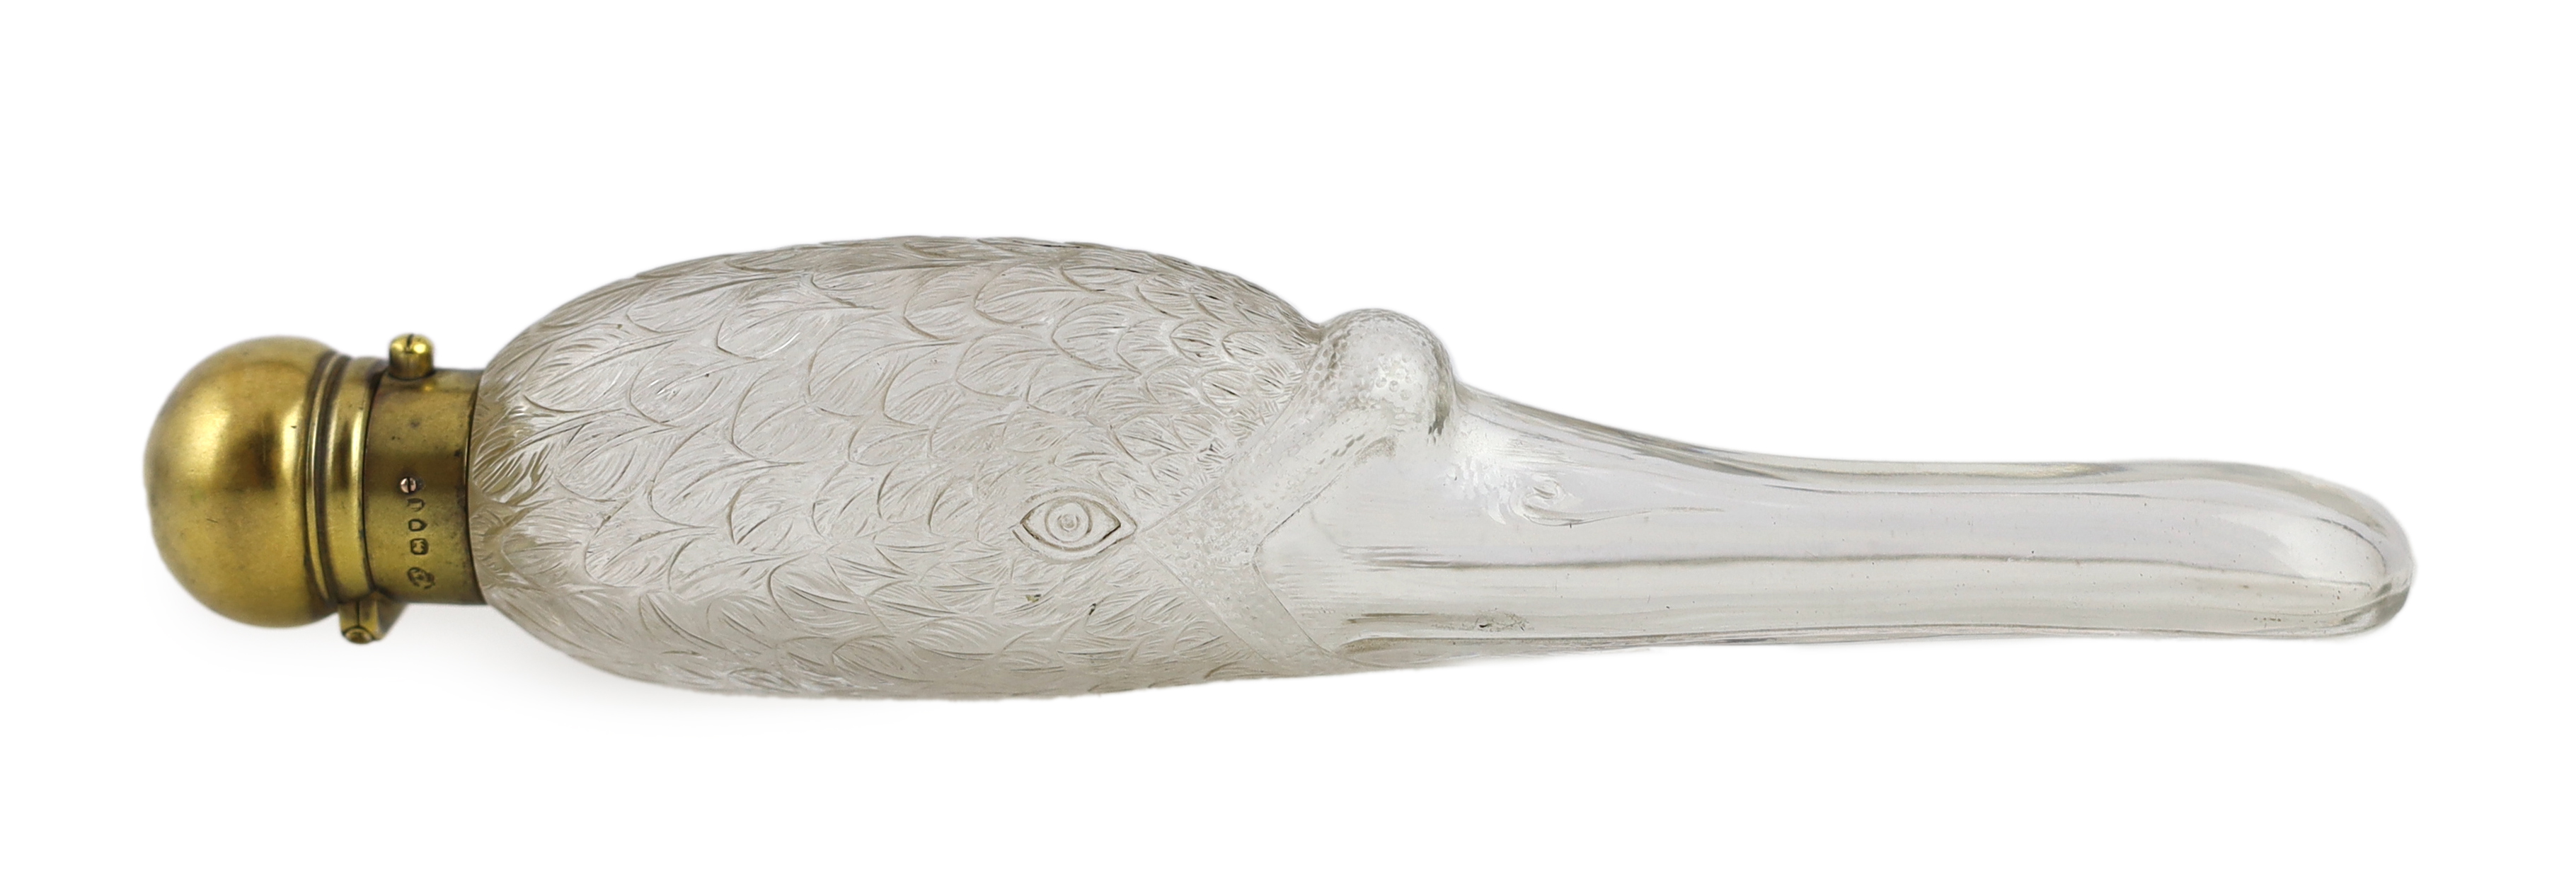 A Victorian silver gilt mounted moulded glass scent bottle, the glass body modelled as the head of a swan, by Walter Thornhill